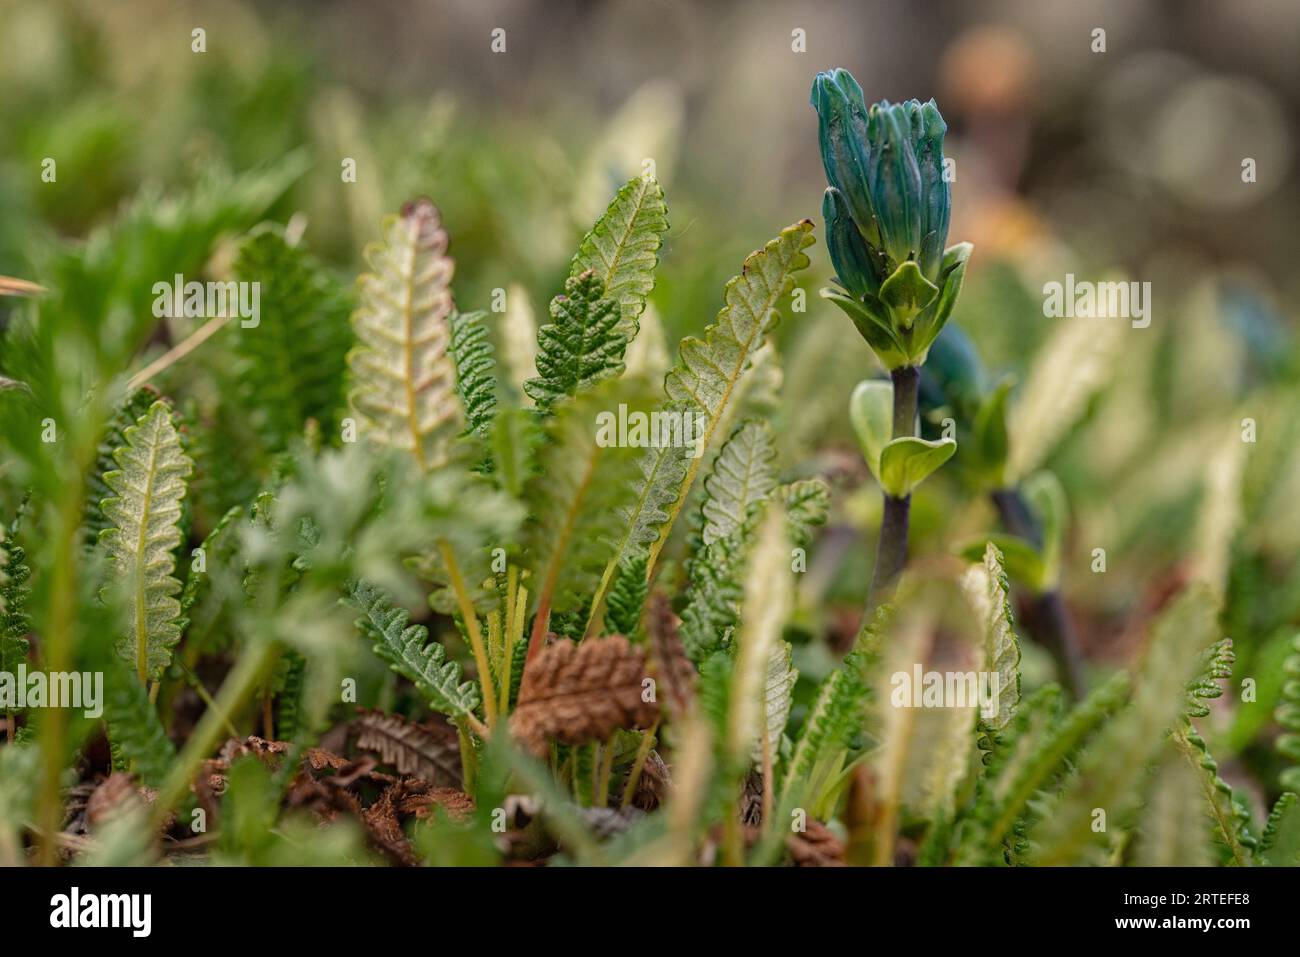 Close-up of a woody, flowering plant with teal colored flower budding among the green, fern-like leaves; Yukon Territory, Canada Stock Photo